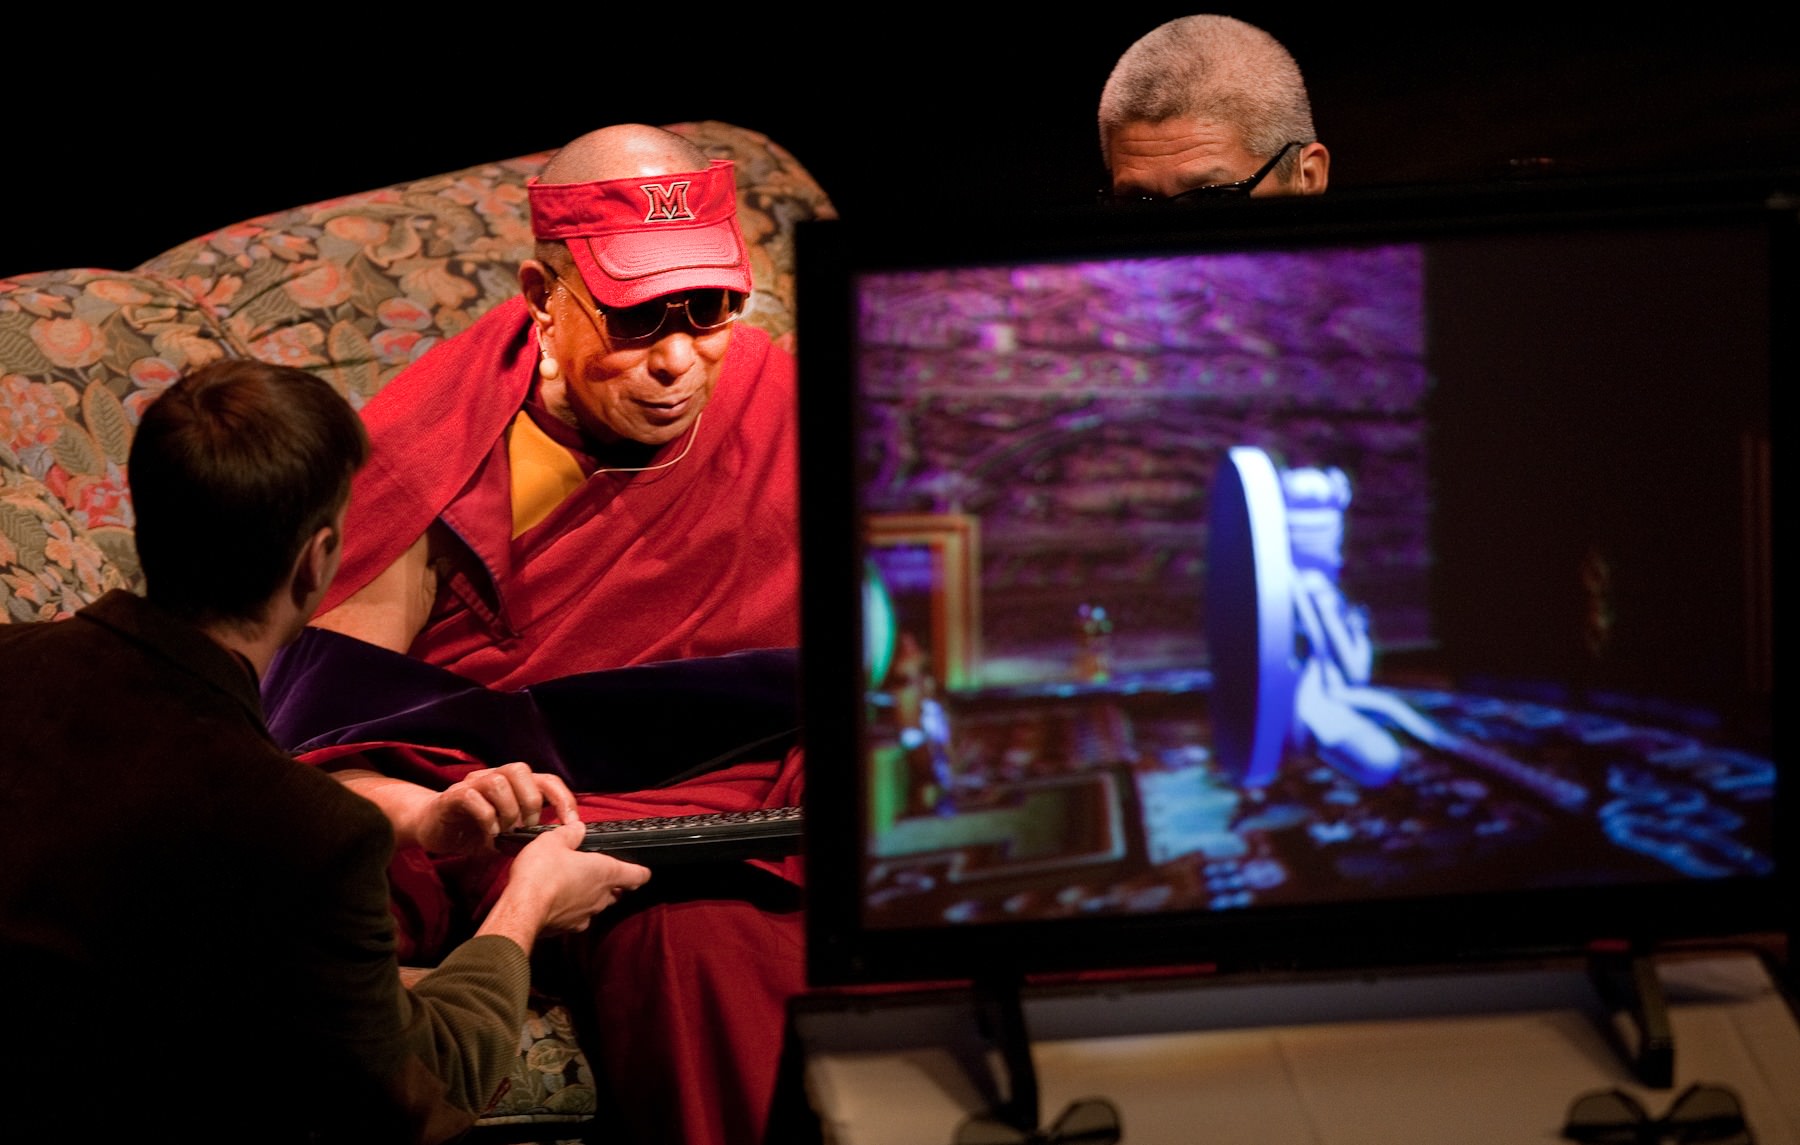 His Holiness the Dalai Lama Dons 3D Glasses to Experience a Virtual Mandala – Created in EON Reality’s Software